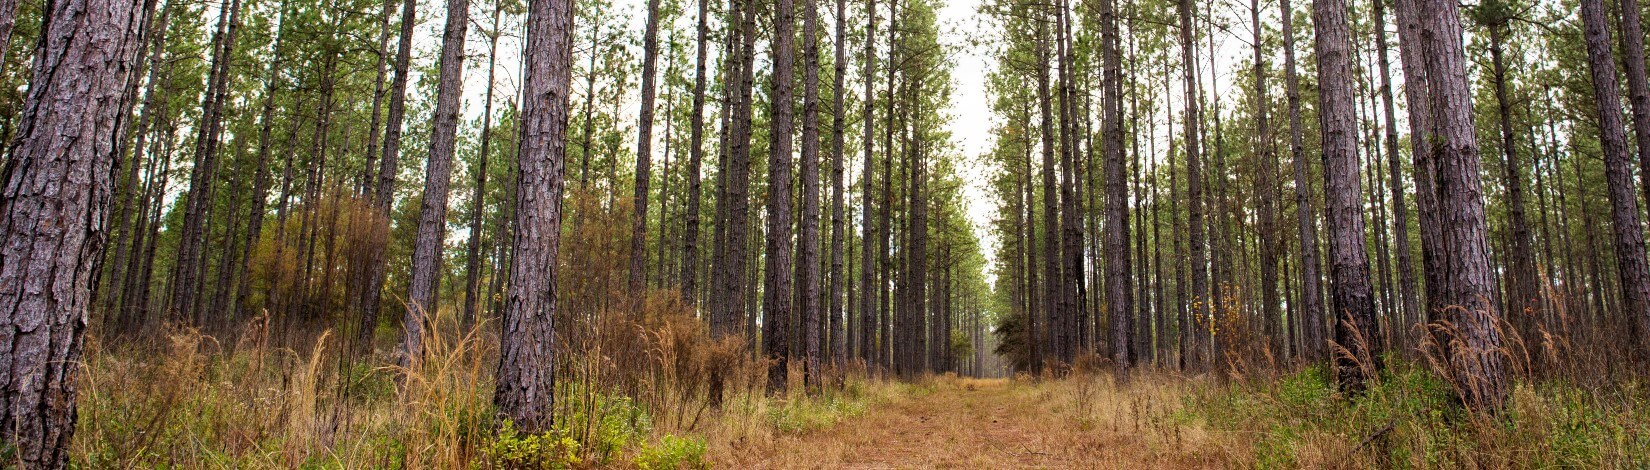 wide view of a healthy pine forest with tall trees and a spacious path